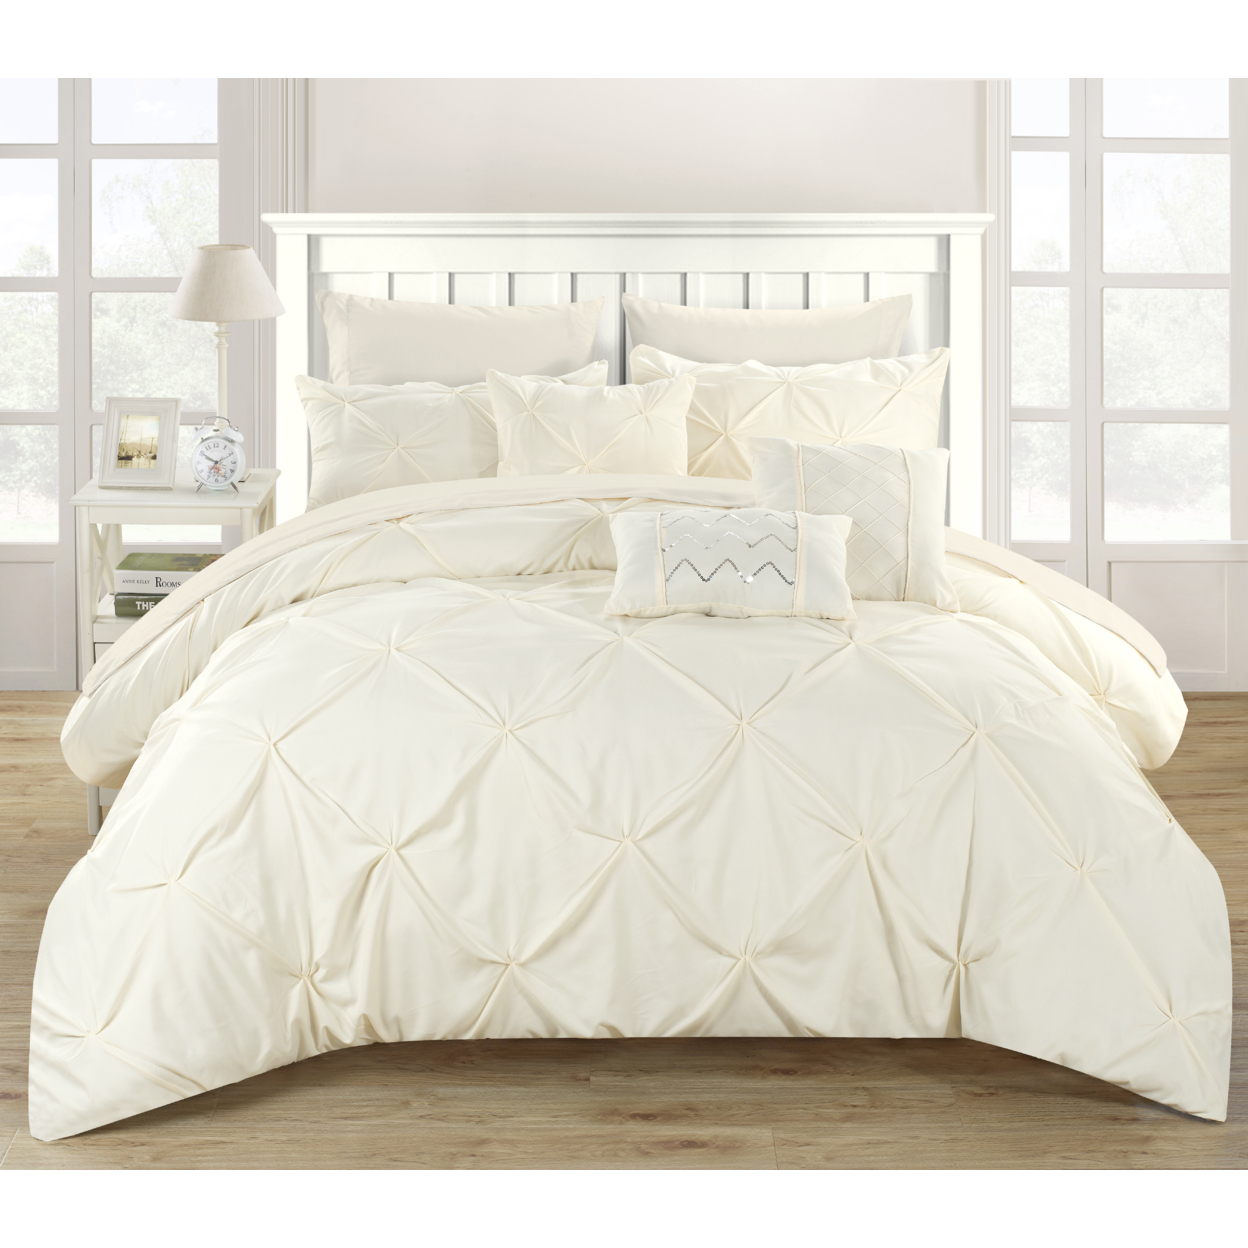 Alvatore Pinch Pleated Bed In A Bag Comforter Set - Taupe, Queen